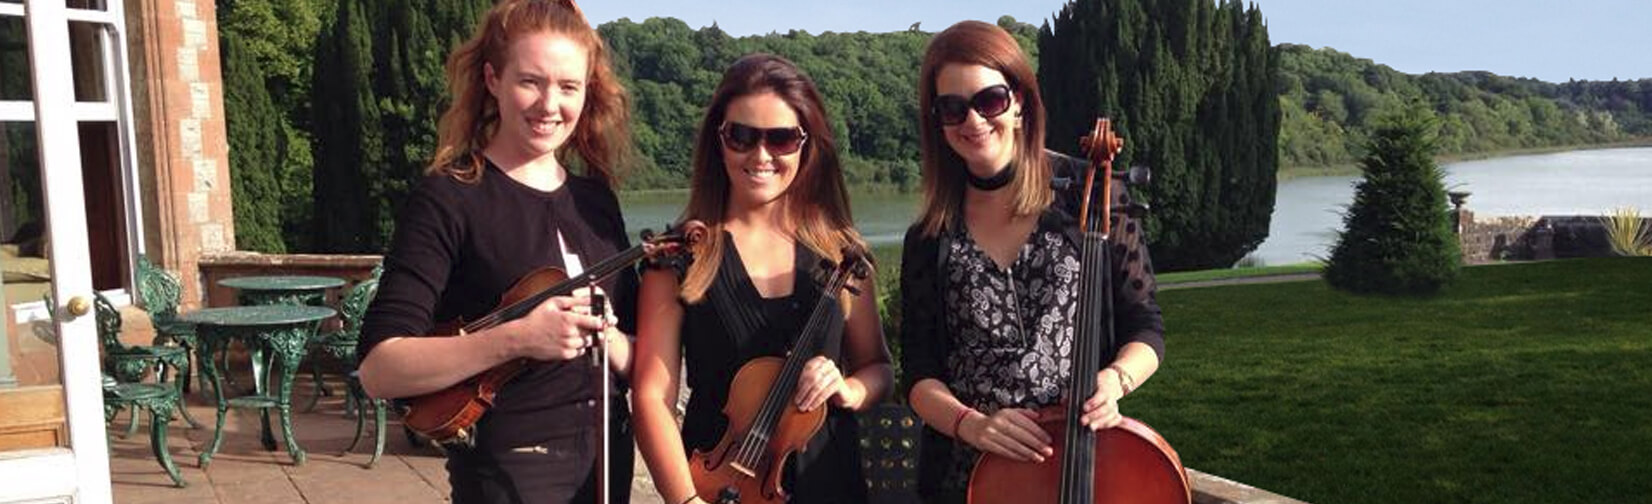 A talented string ensemble available for wedding receptions, ceremonies and other special occasions.